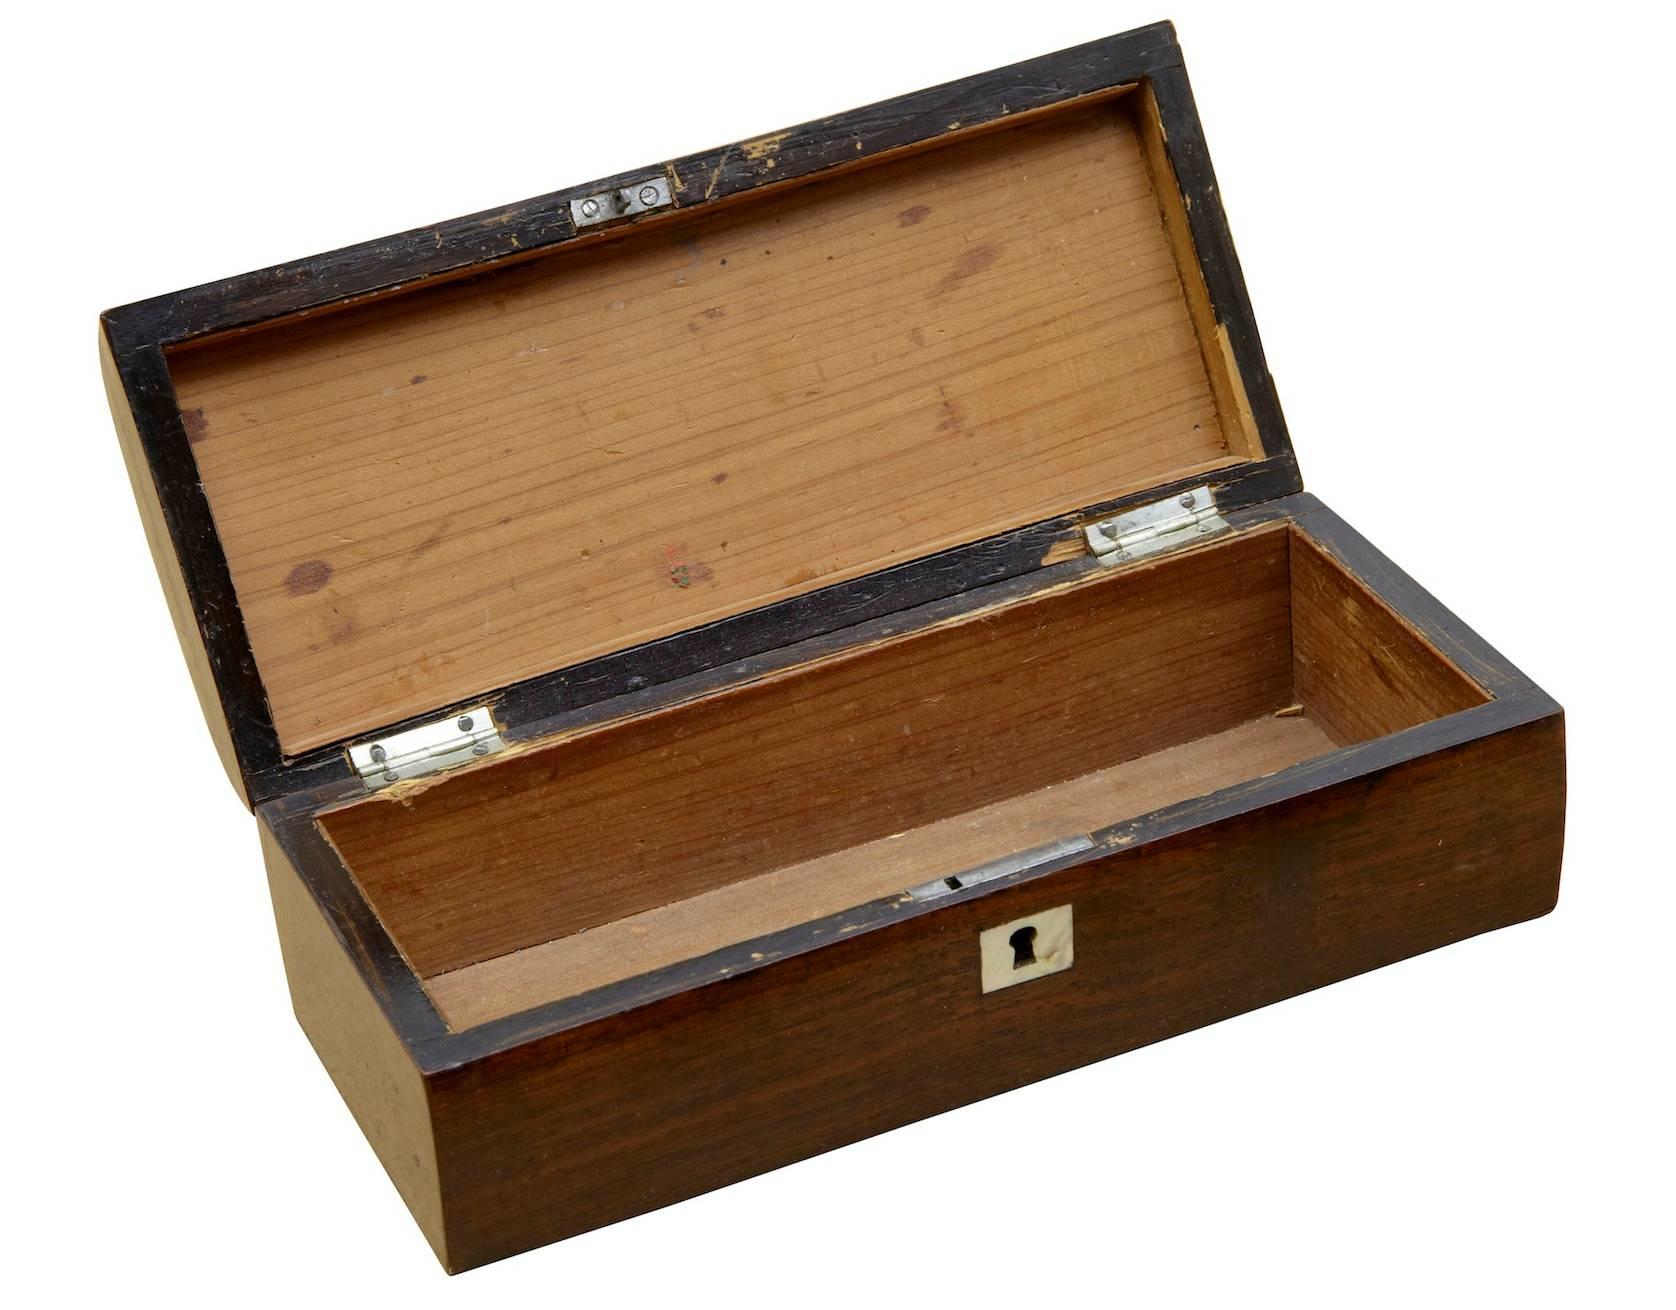 Naive  box, inlaid Ideal for pen box, circa 1870.
Minor losses to woodwork.

Measures: Height 2 1/2